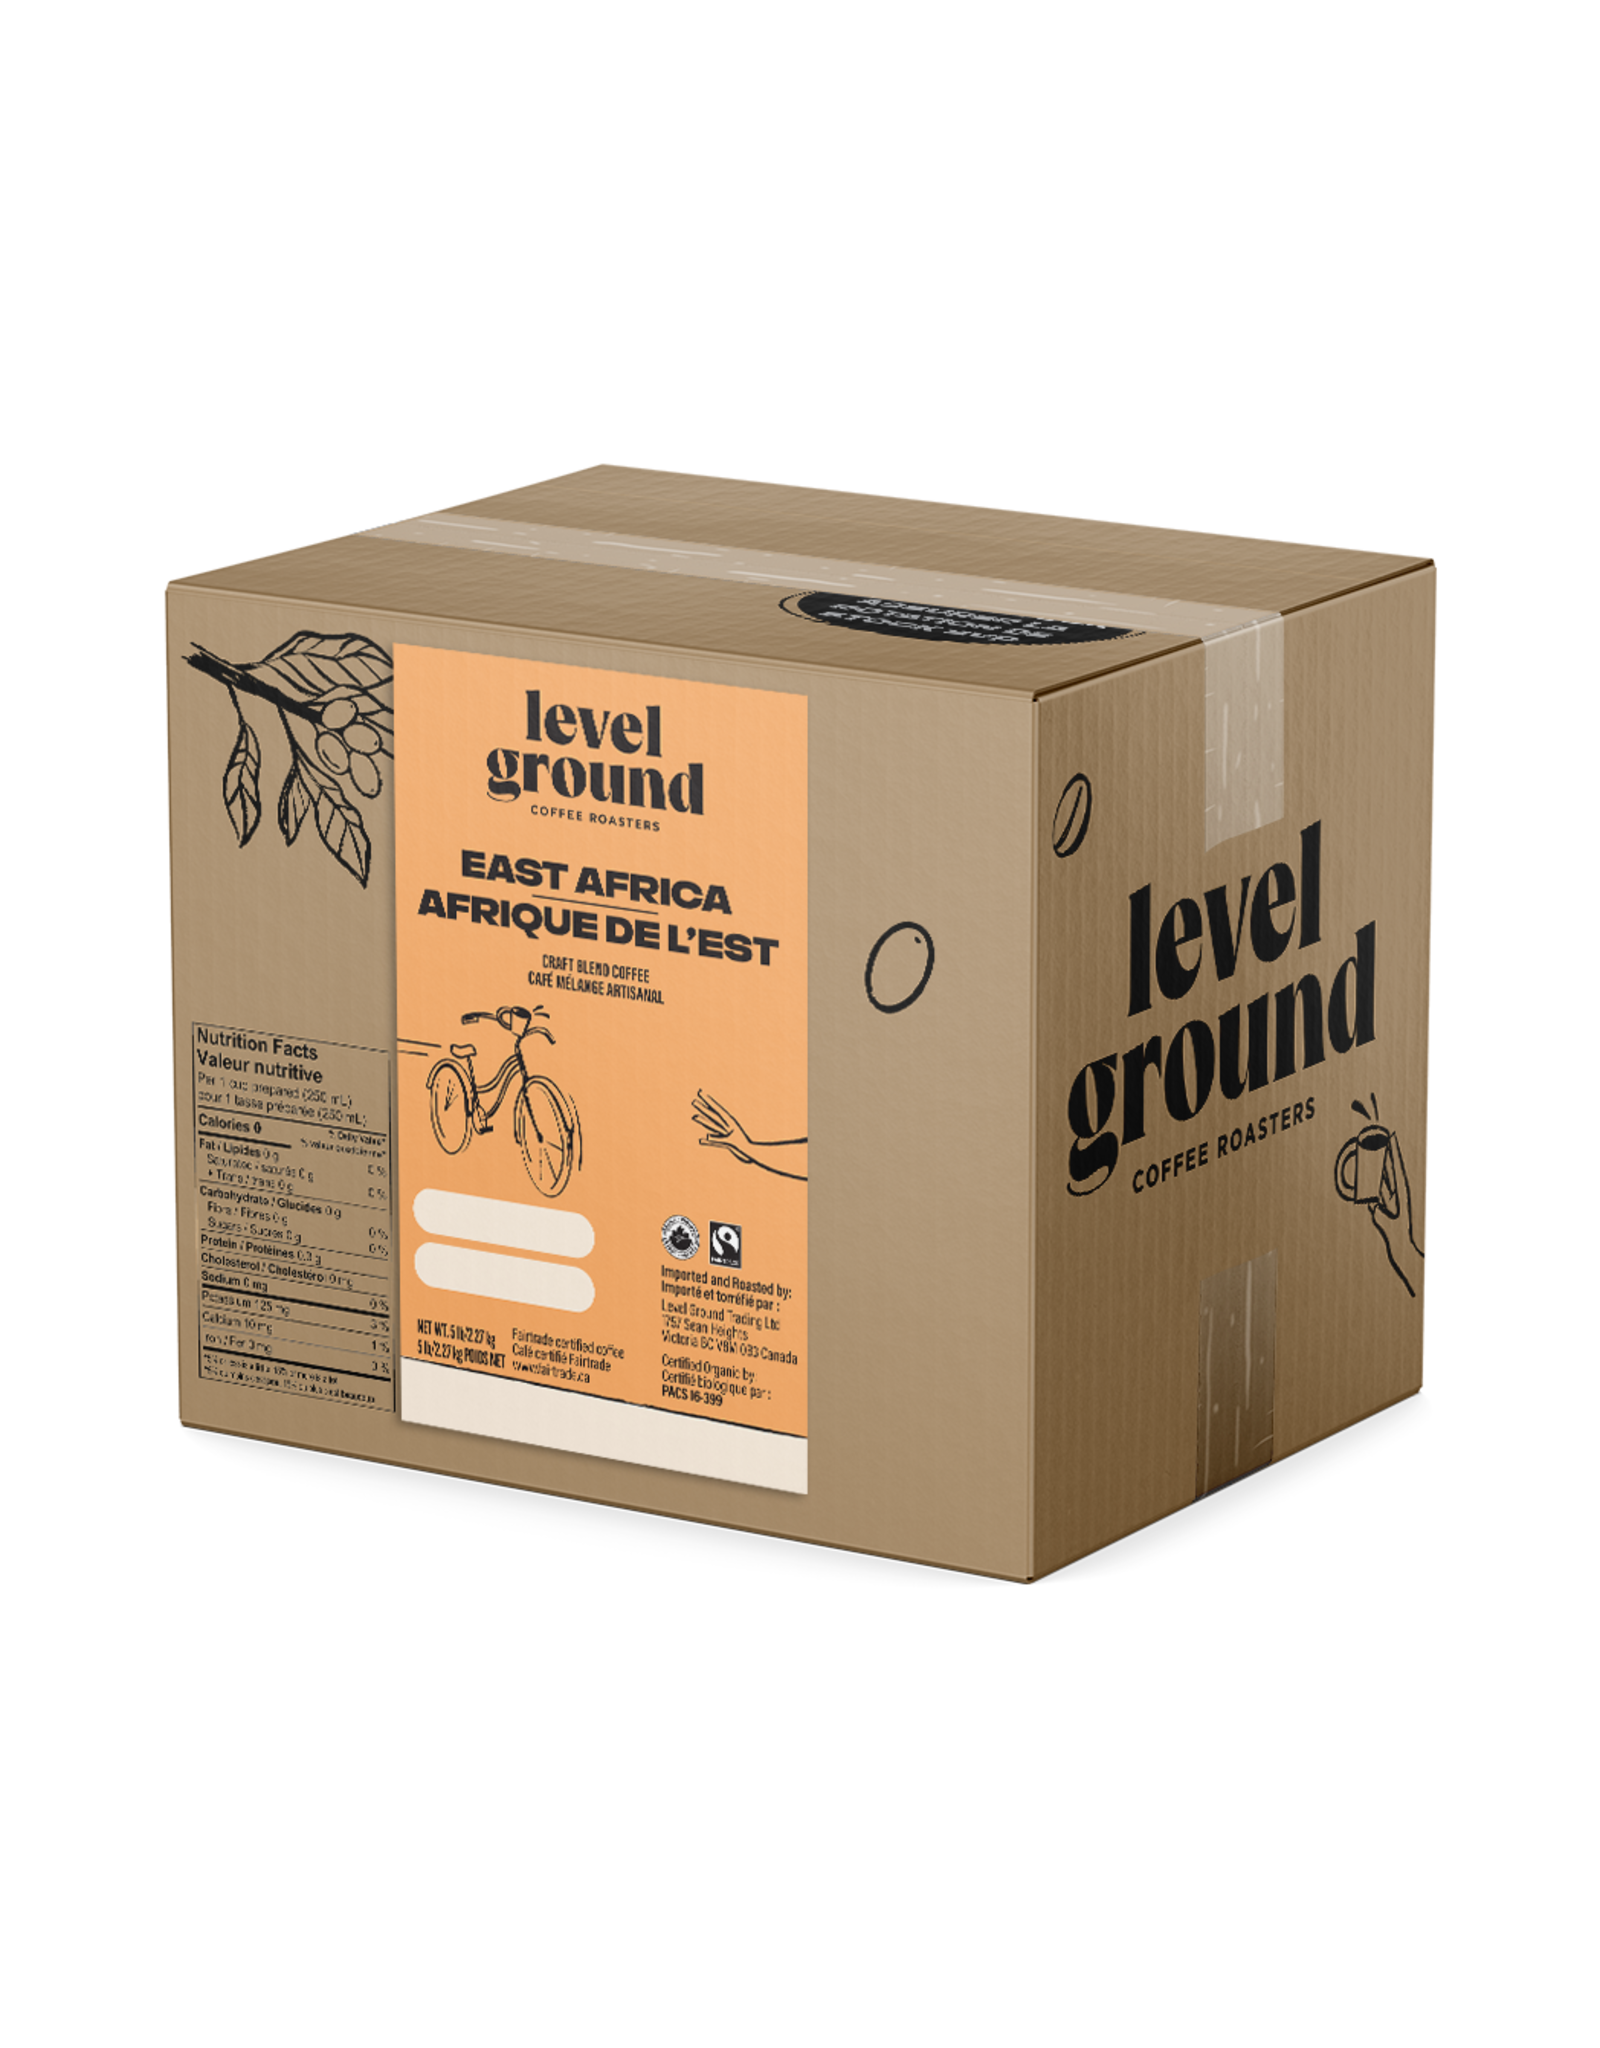 Level Ground Coffee - East Africa - 5lb